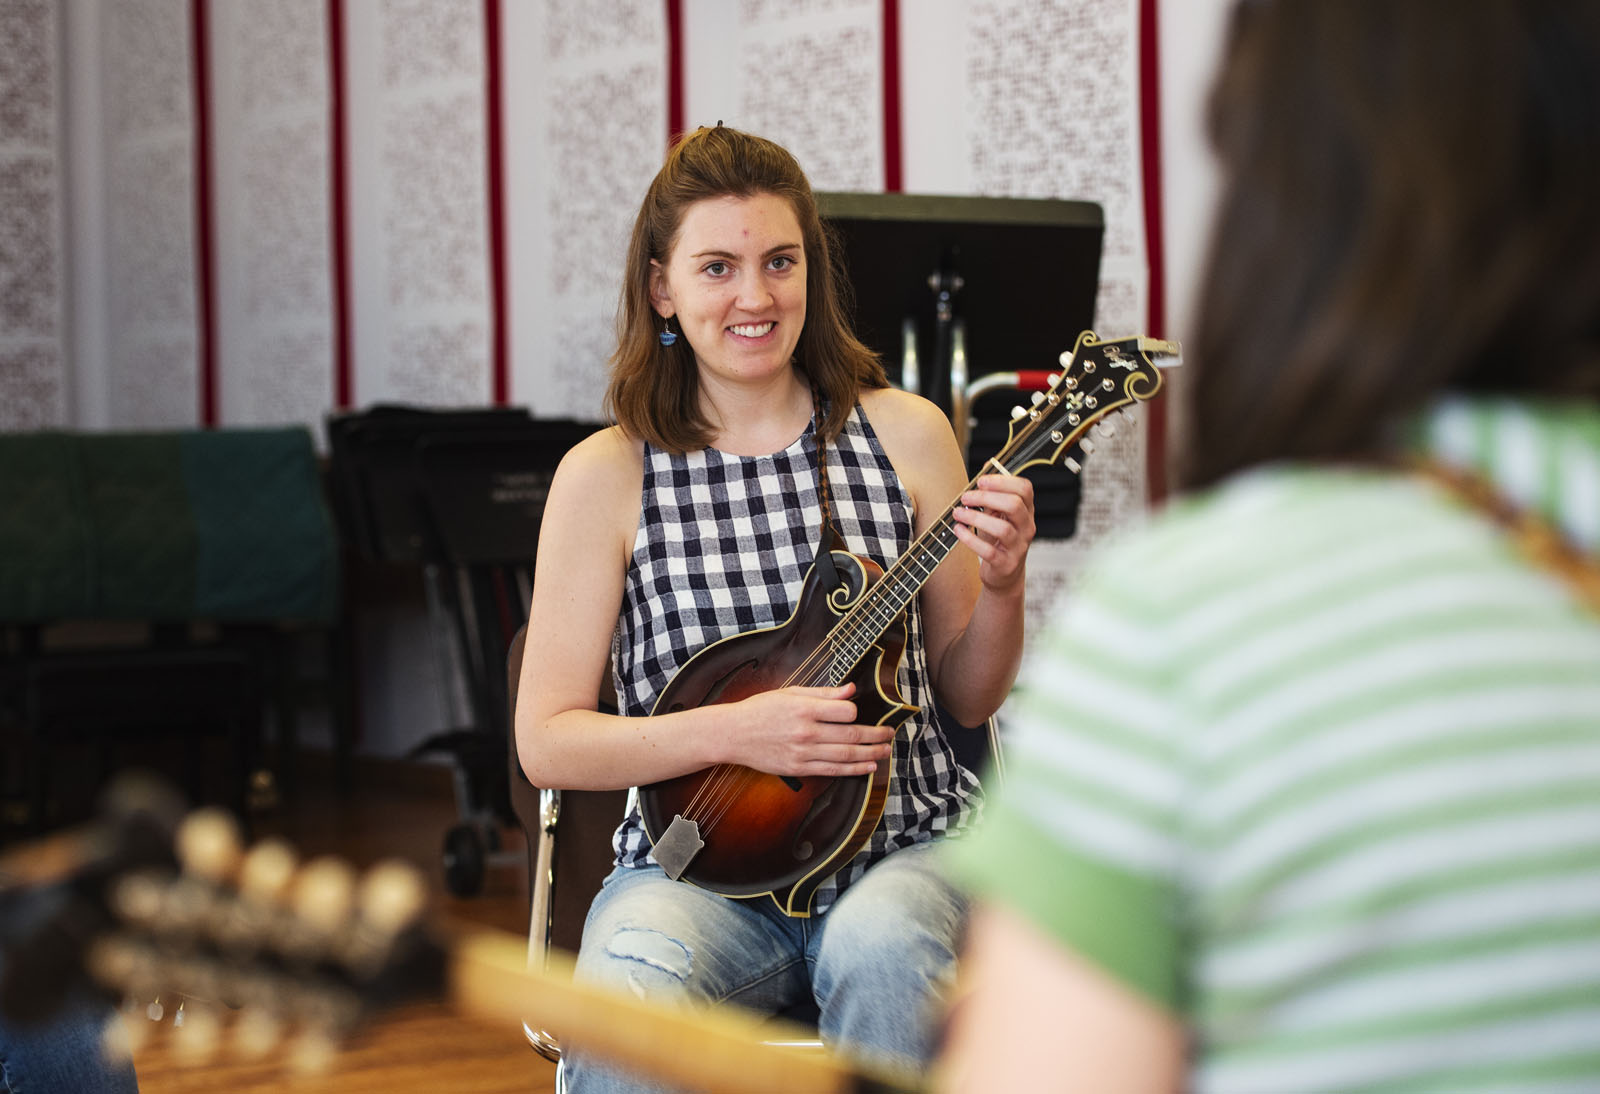 Nicole Pey ’15 holds her mandolin while listening to Grammy-nominated instructor Sierra Hull speak during the Bluegrass Workshop in Packard Hall on June 26, 2018.